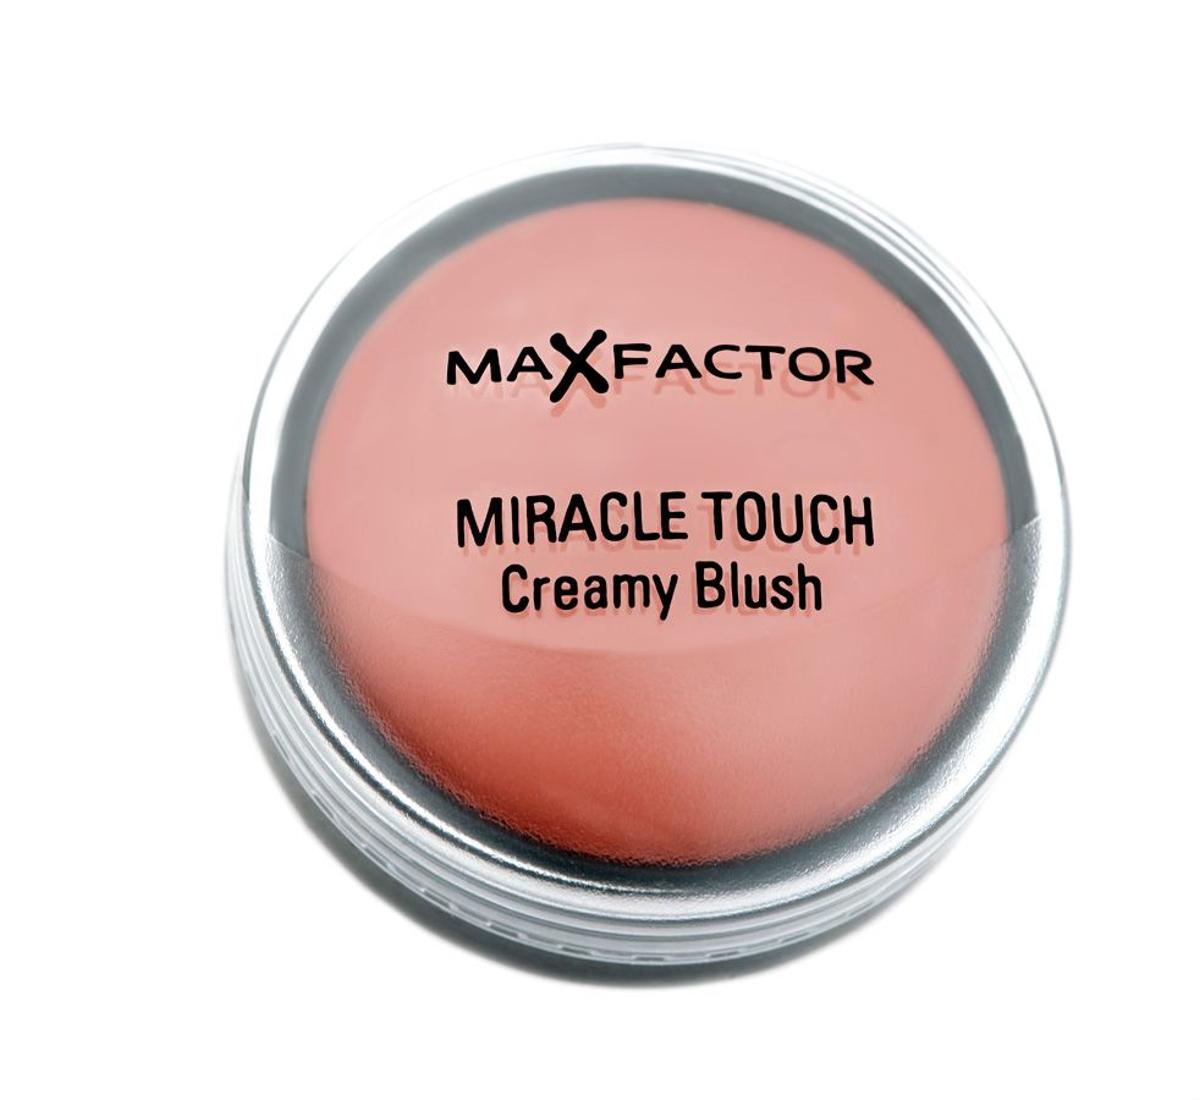 Miracle Touch Creamy Blush, Max Factor